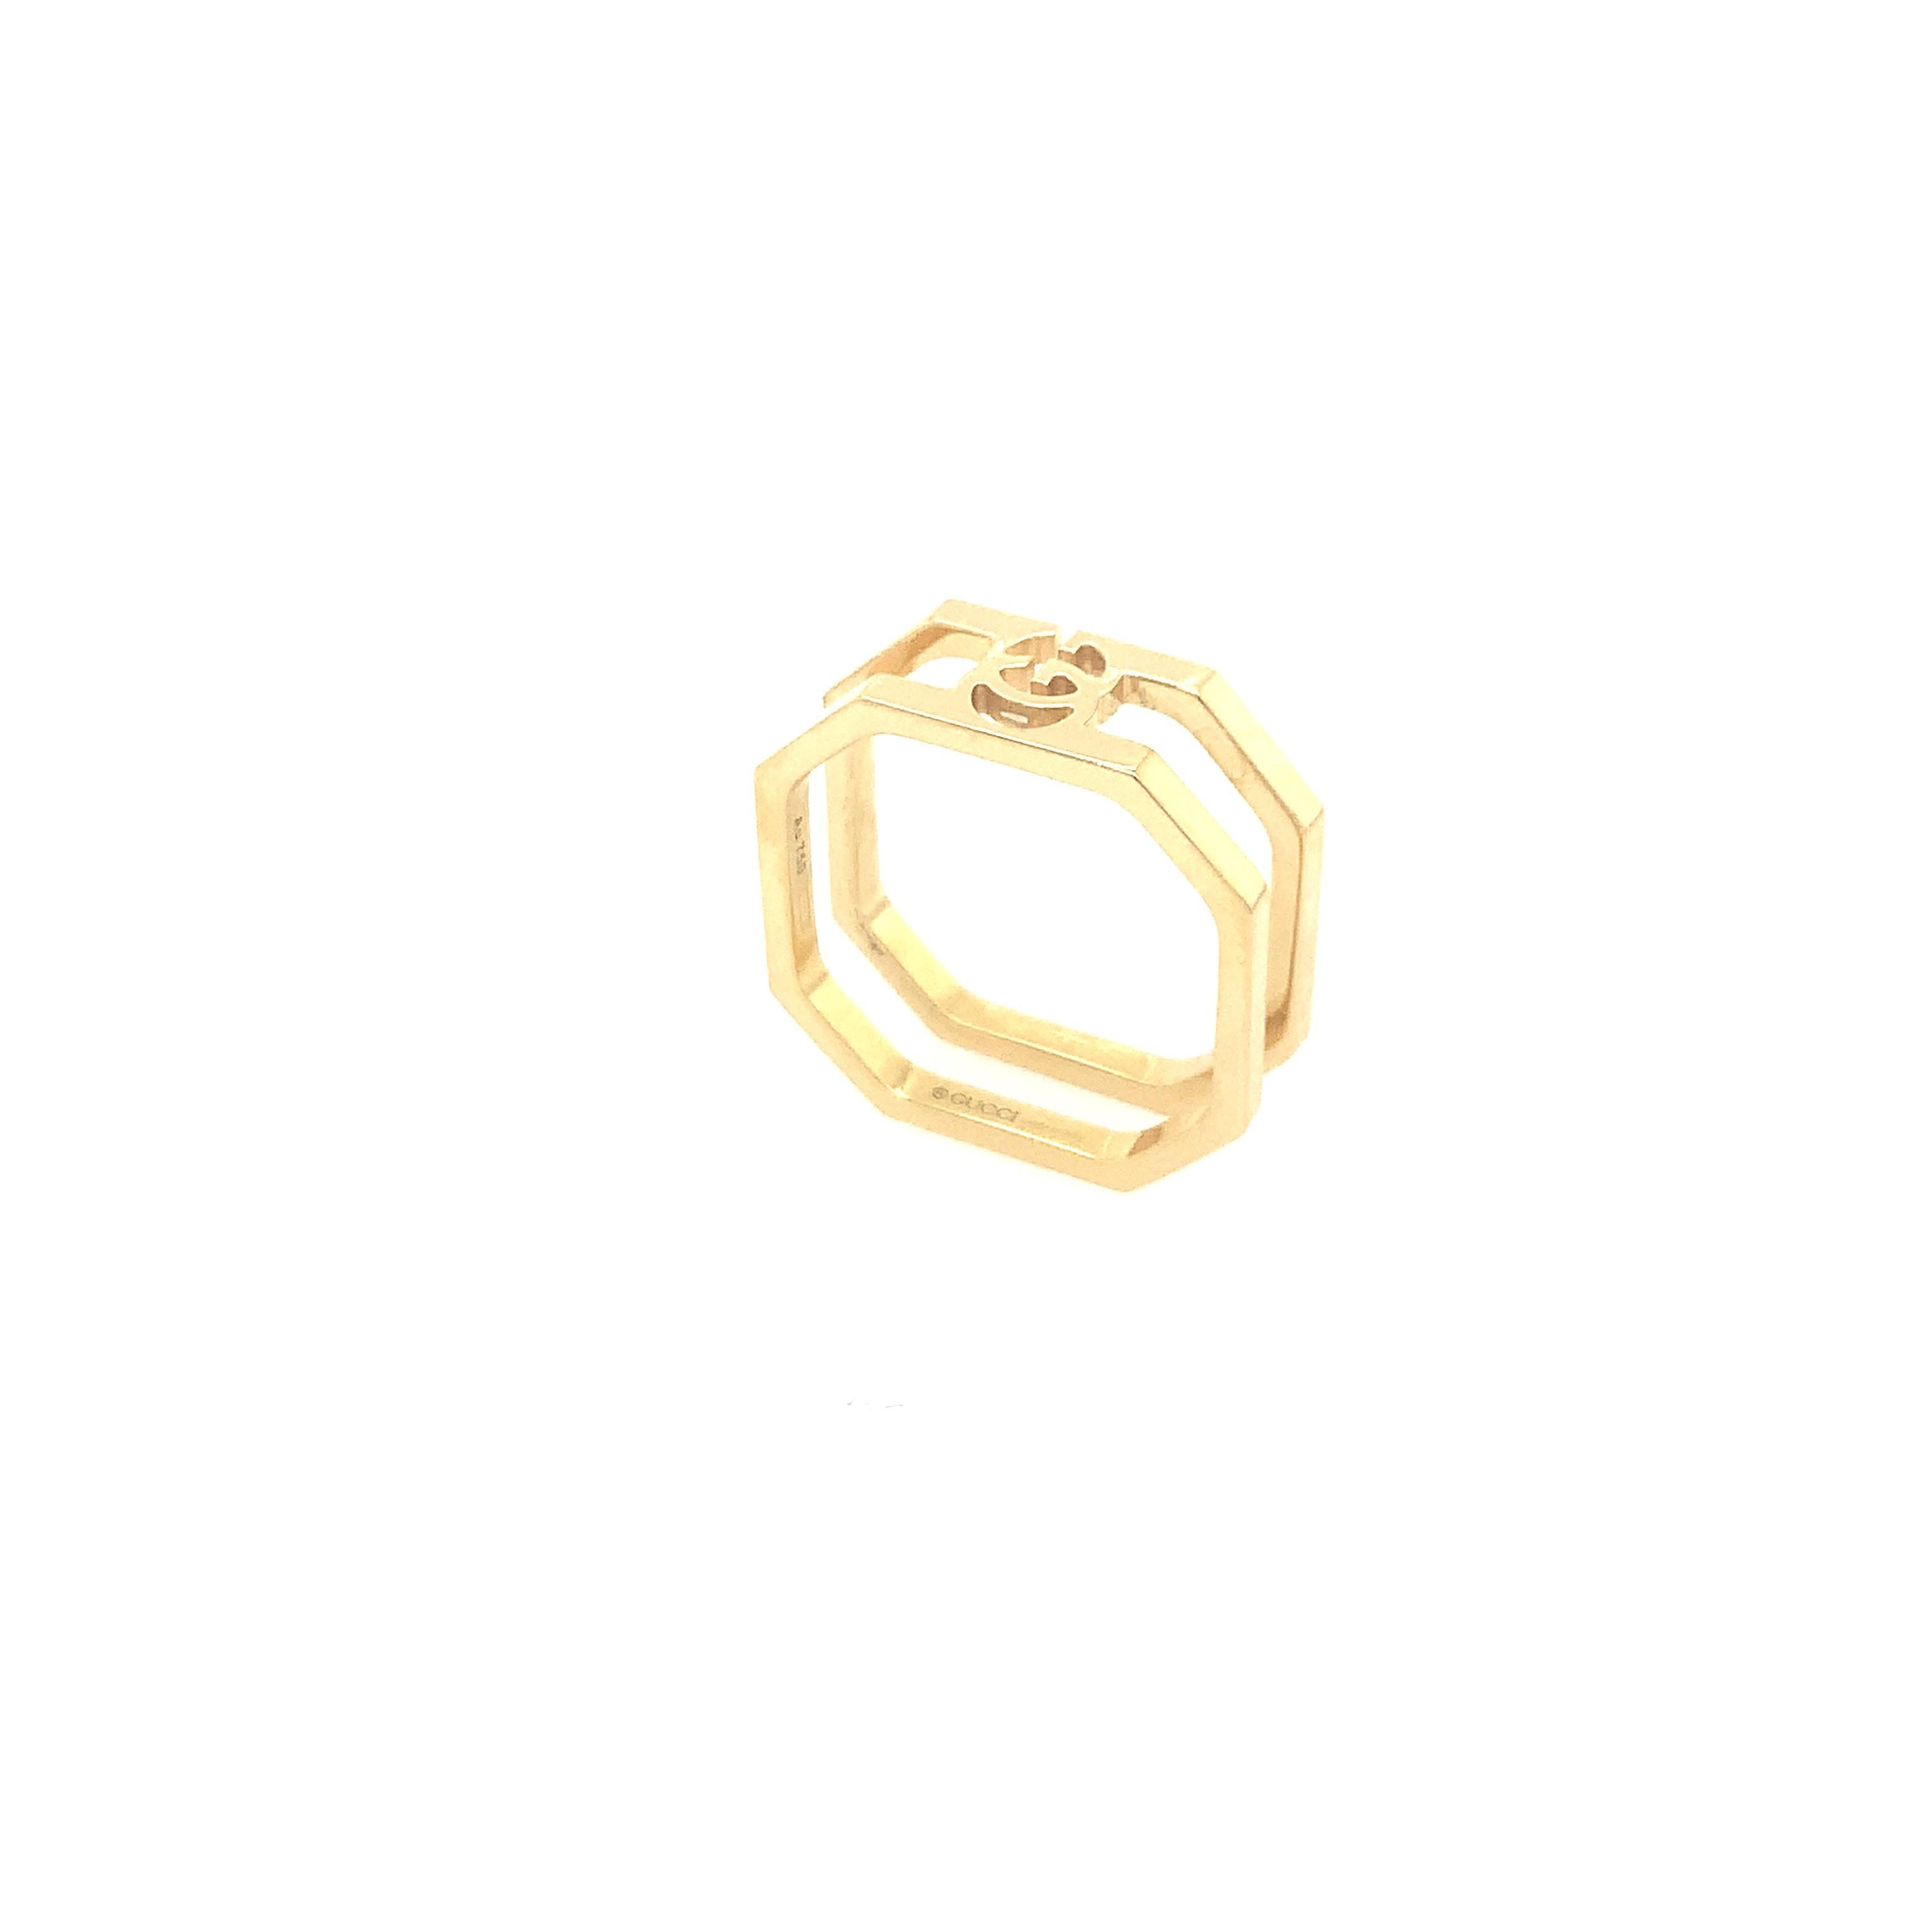 The Gucci running double ring is crafted from 18K yellow gold and designed with cut edges featuring the signature GG logo. With an octagonal shape, this Gucci ring is elegant and timeless. Subtly stylish, this ring is a rare Gucci find. 